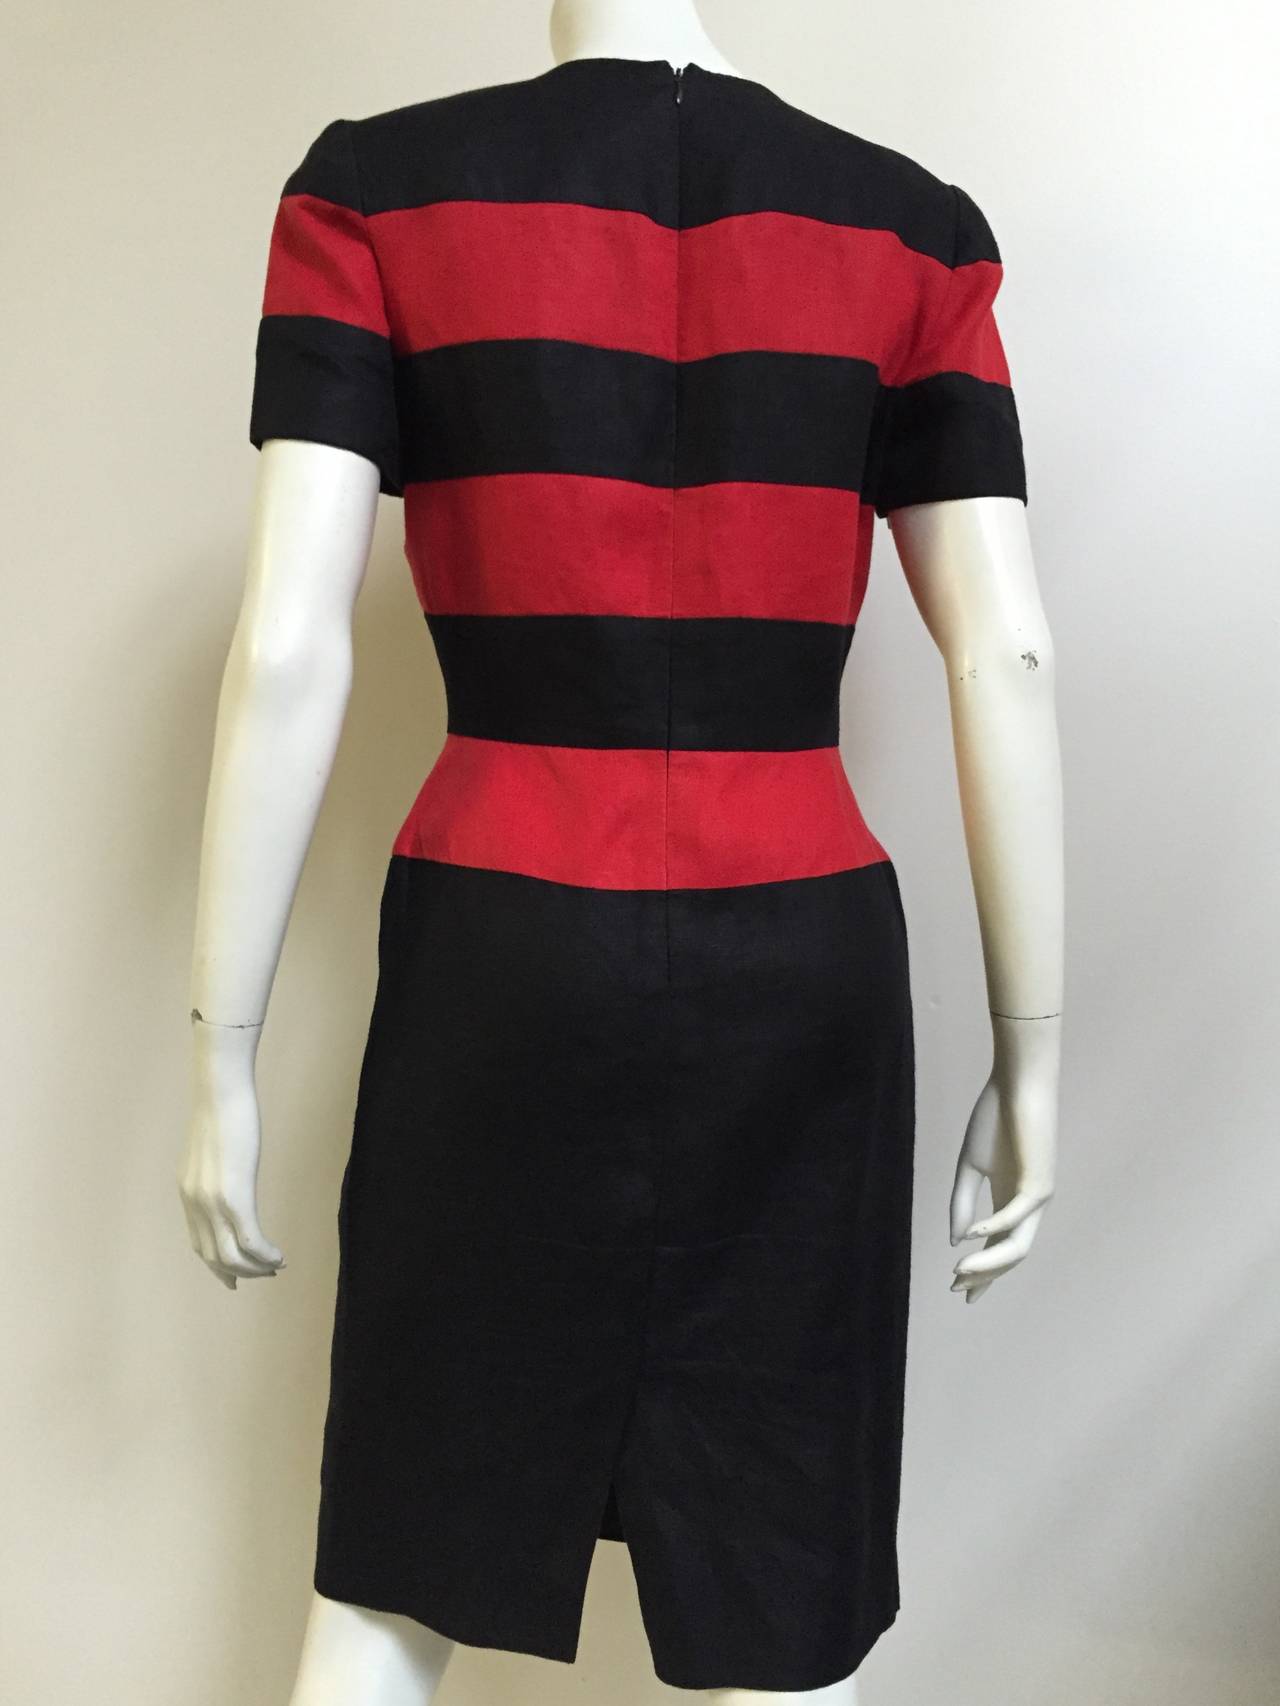 Scaasi Black and Red Linen Striped Sheath Dress, Size 6  im Angebot 1